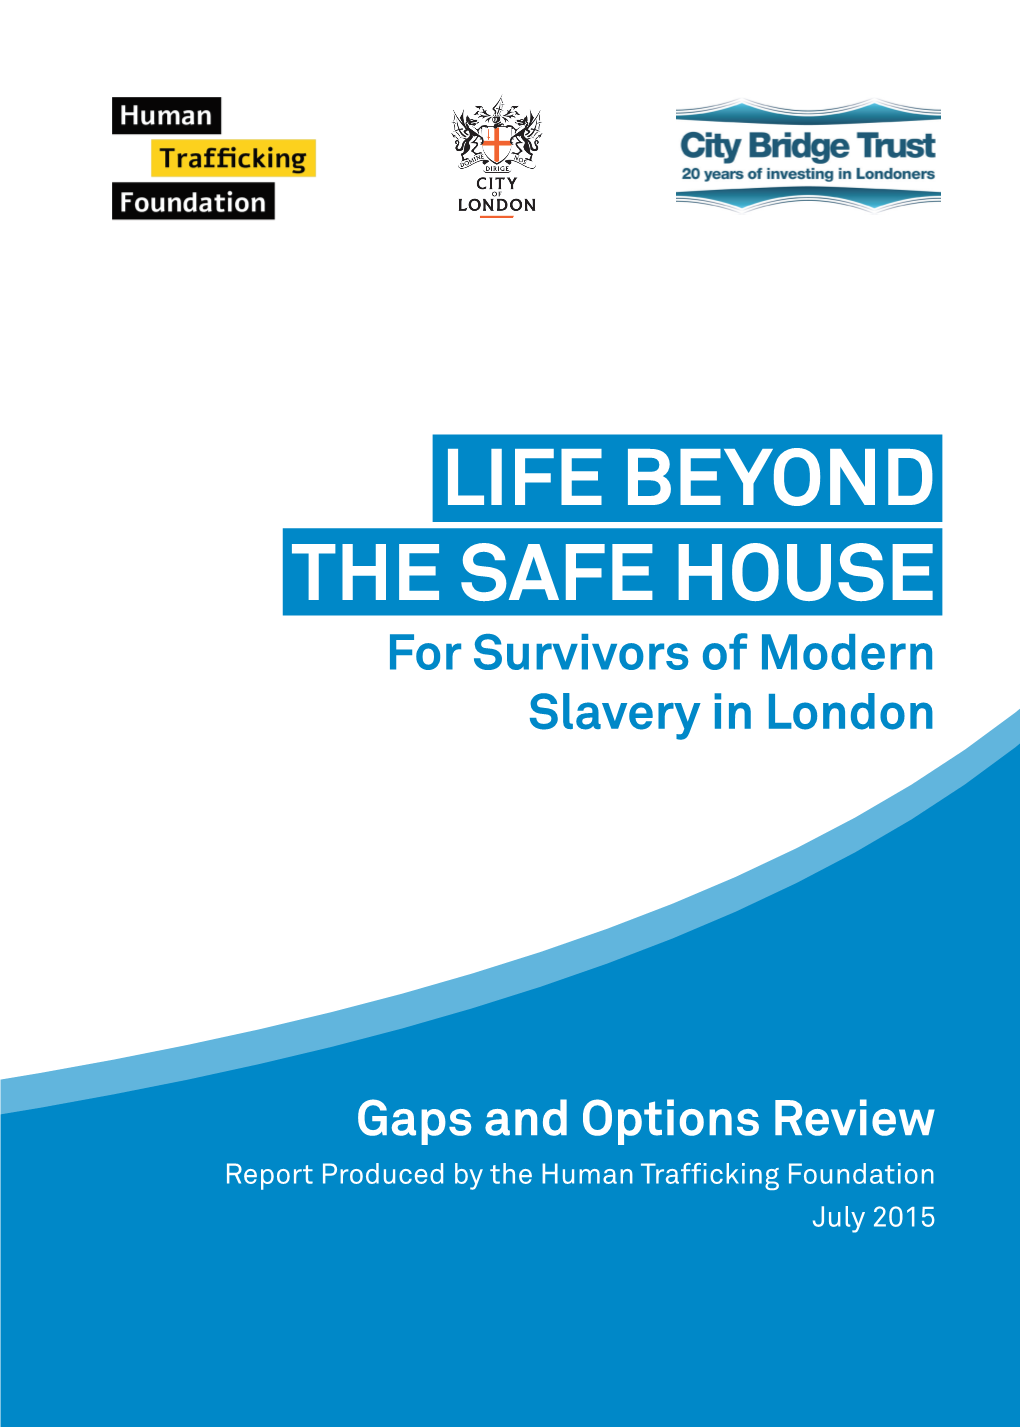 LIFE BEYOND the SAFE HOUSE for Survivors of Modern Slavery in London